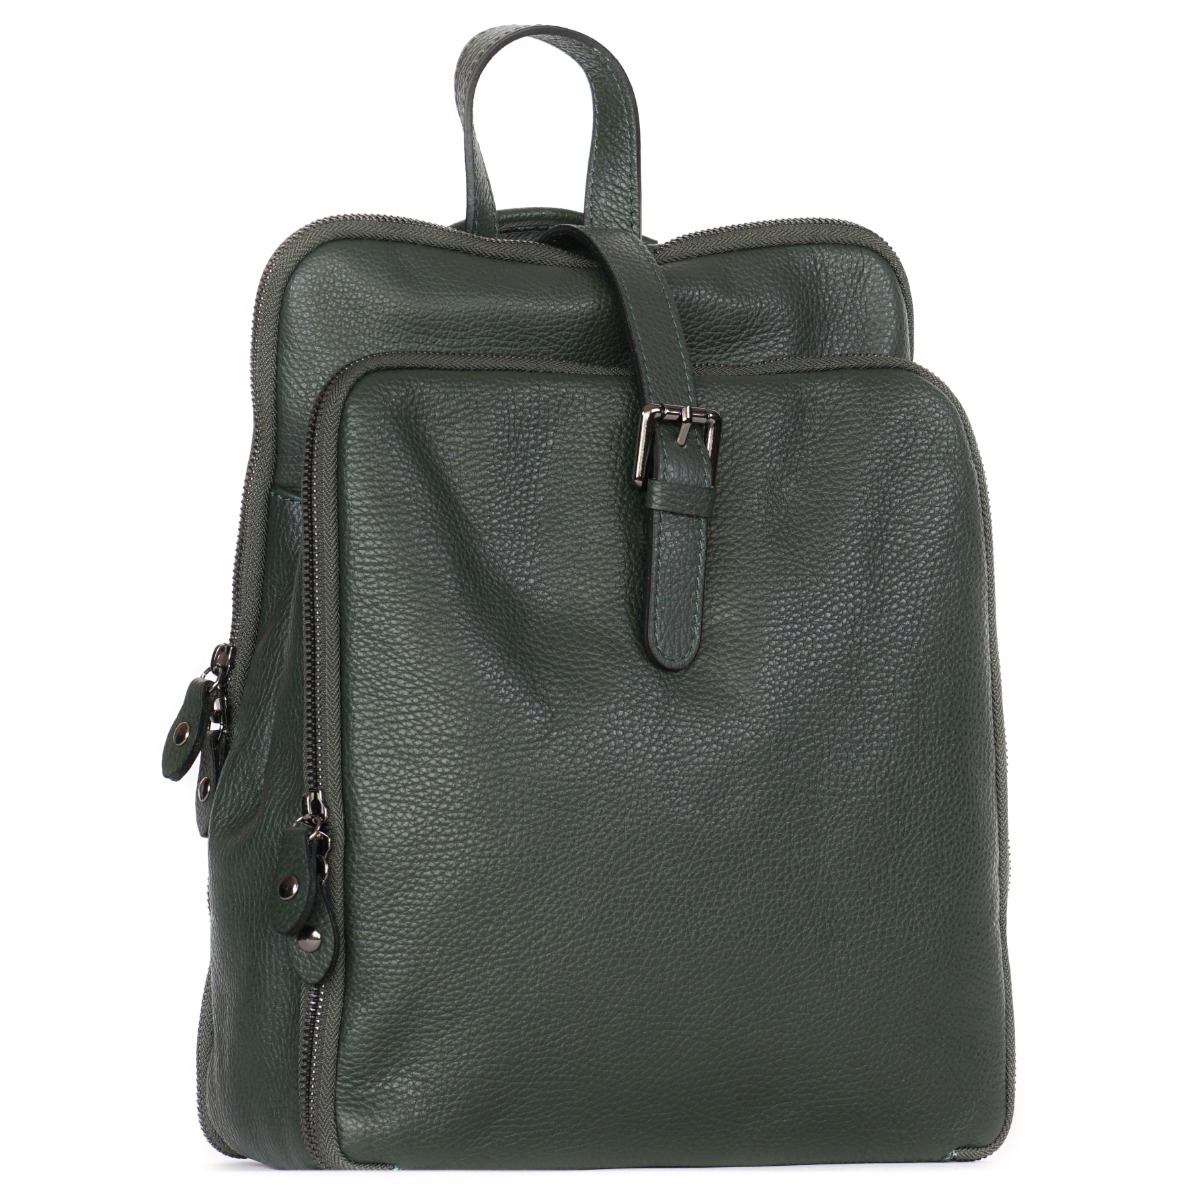 Dark green genuine leather convertible backpack everyday use